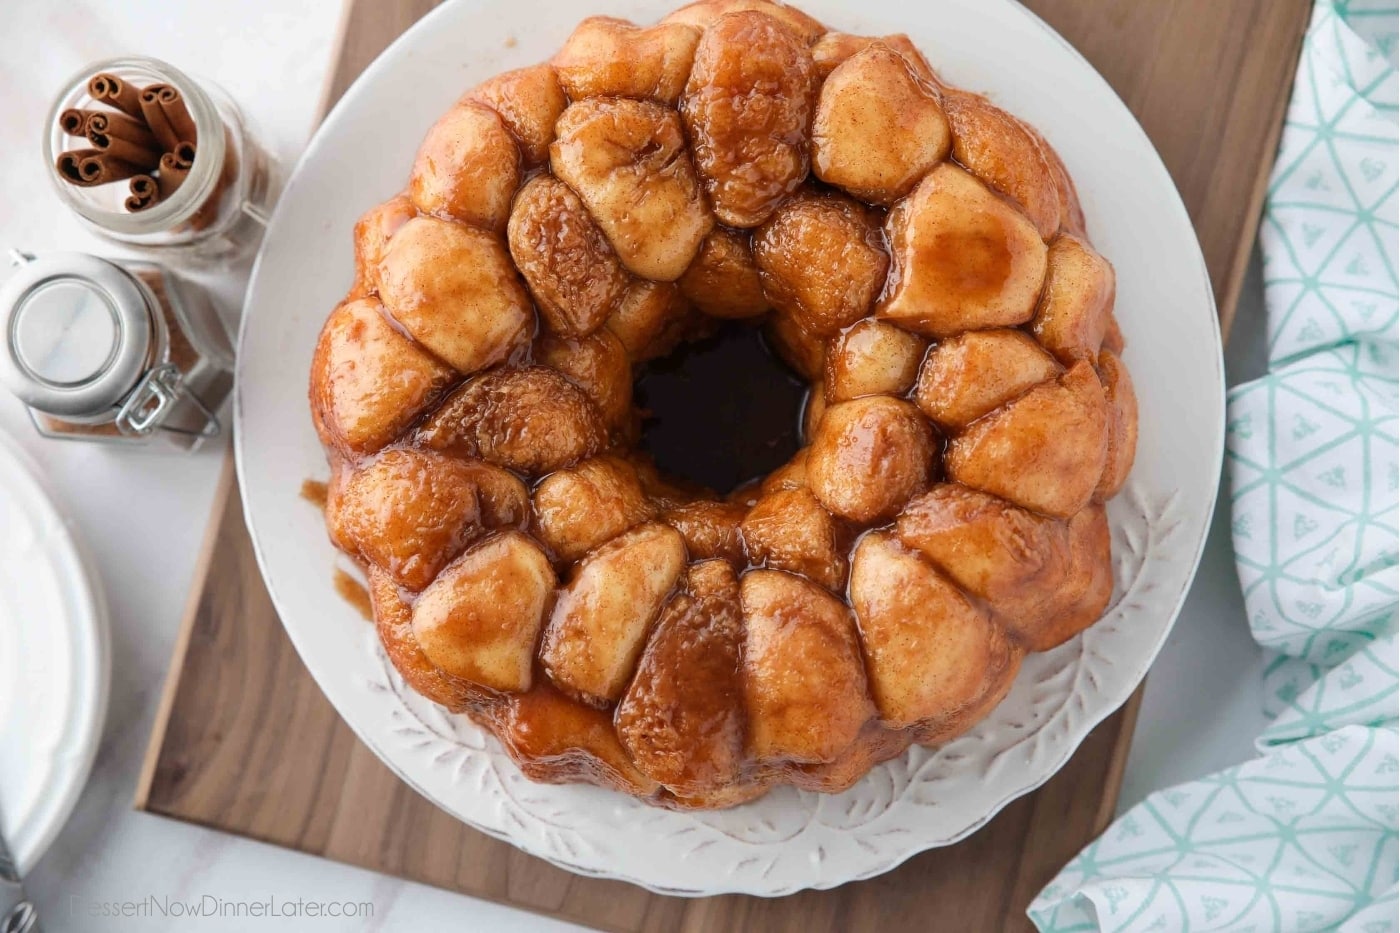 Top view of sticky warm monkey bread on a plate.